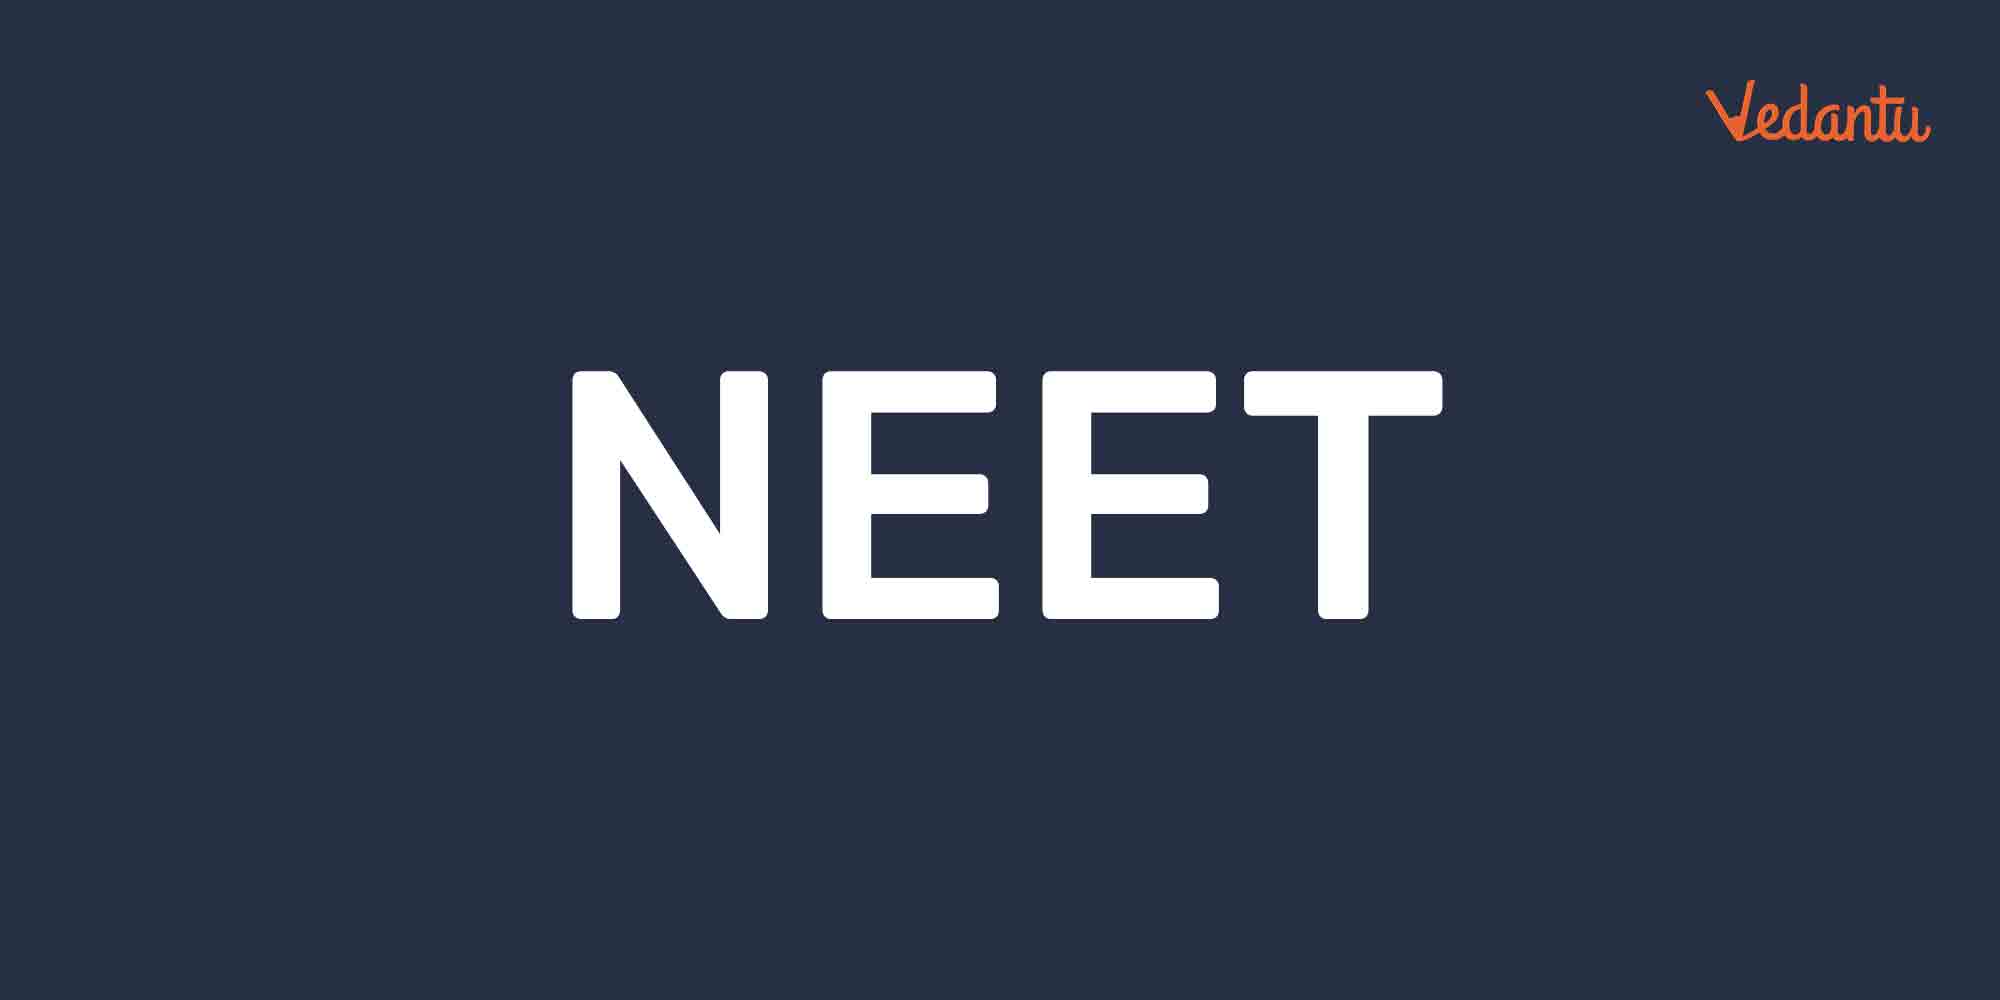 What Courses Come Under NEET?